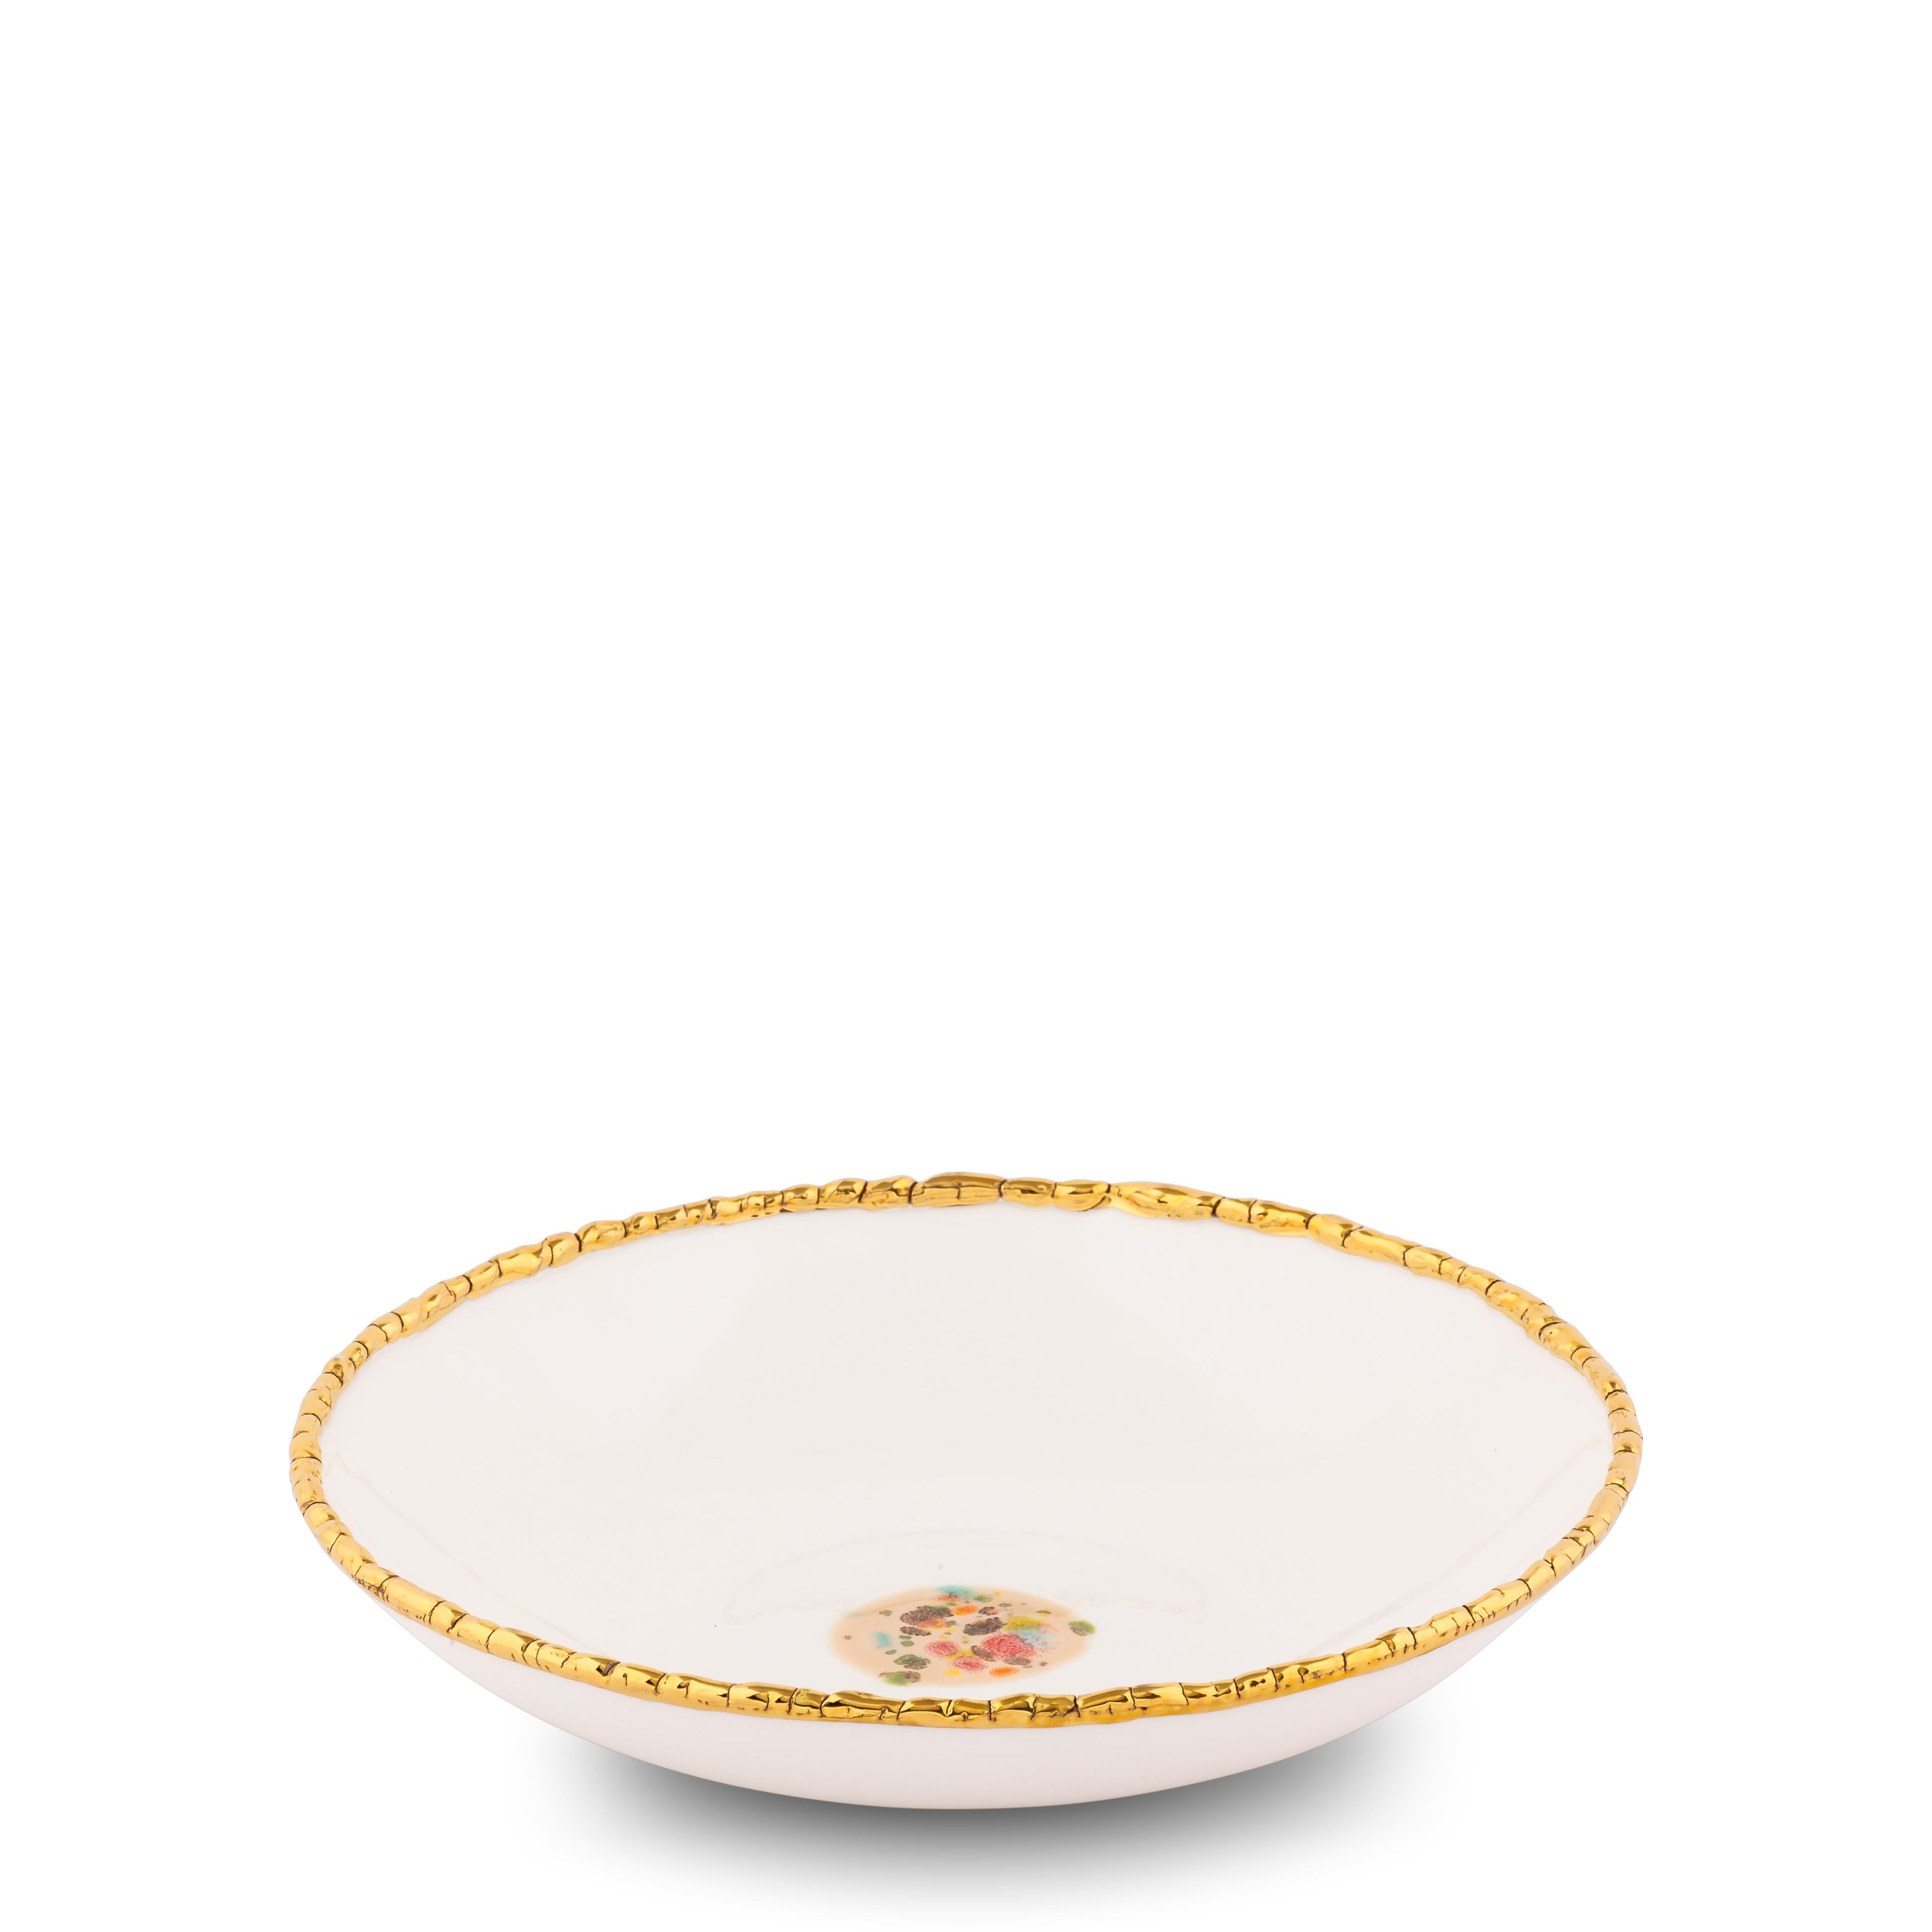 Handcrafted in Italy from the finest porcelain, these white craquelé edge soup coupe plates from the Chestnut collection have an original golden crackled rim emphasizing the elegant white surface with the sandy, dotted décor at the center

Set of